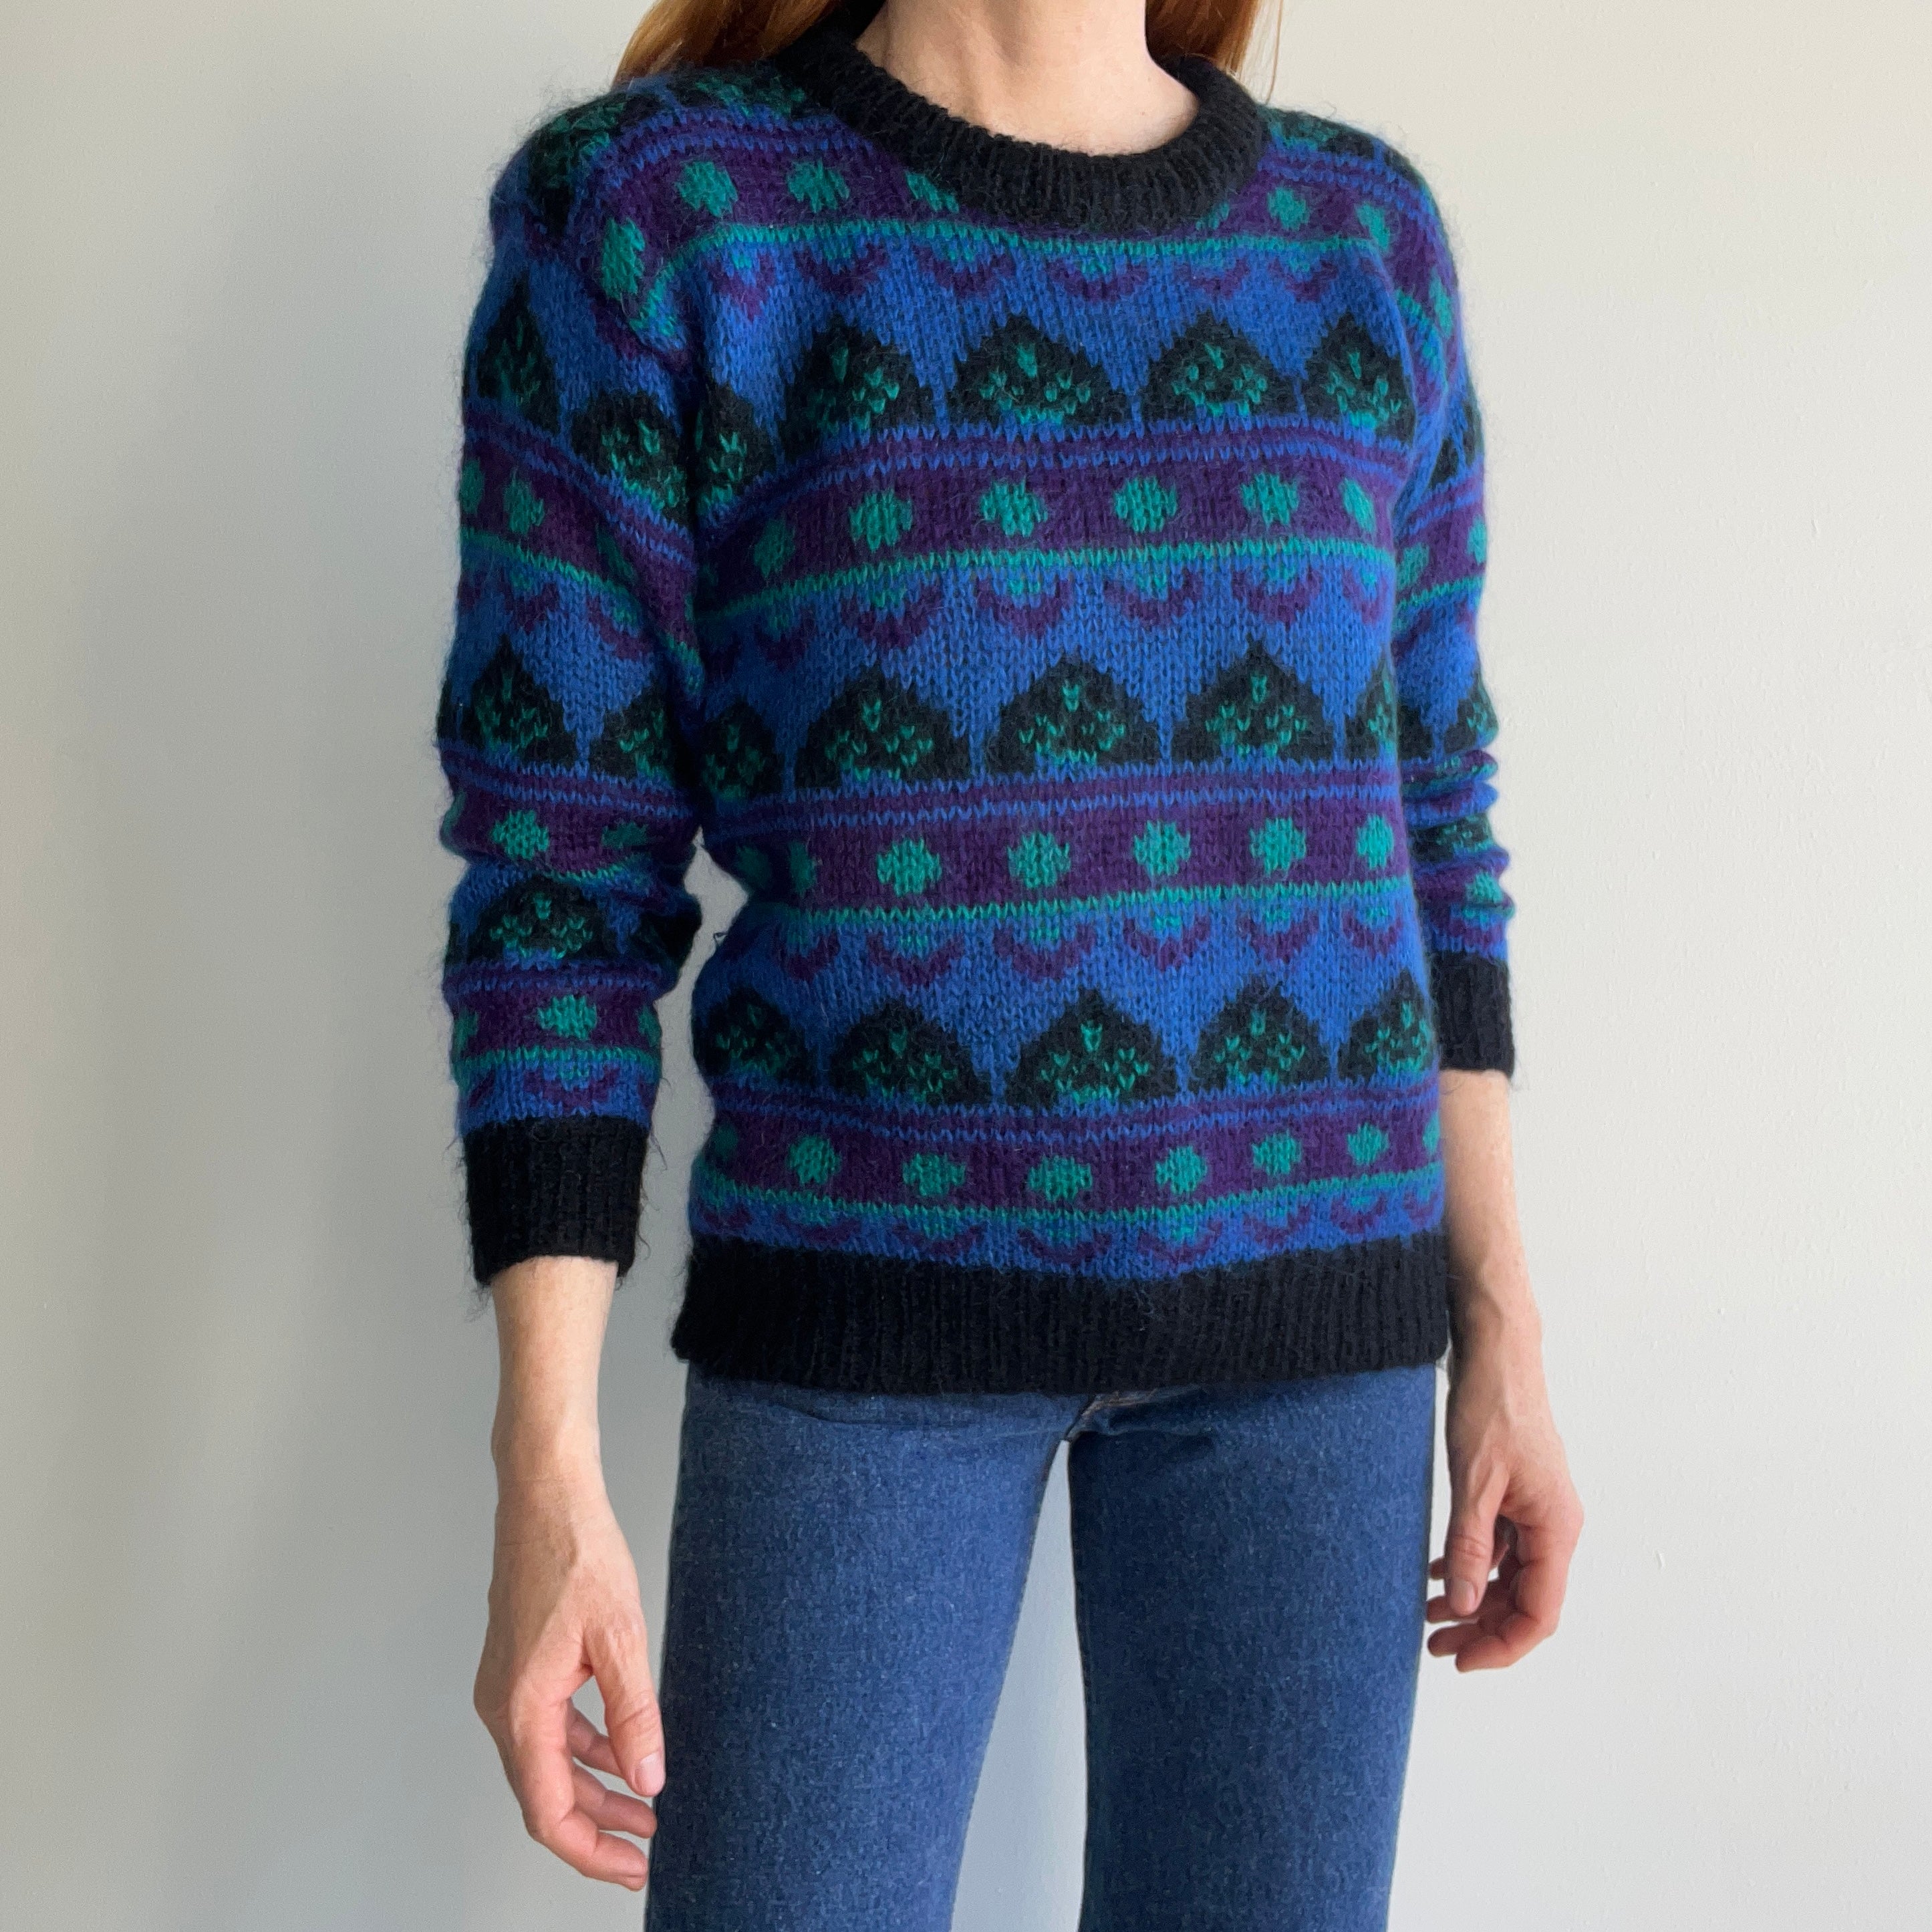 1980s Mohair Blend Sweater with Shoulder Pads - Ohhhlala